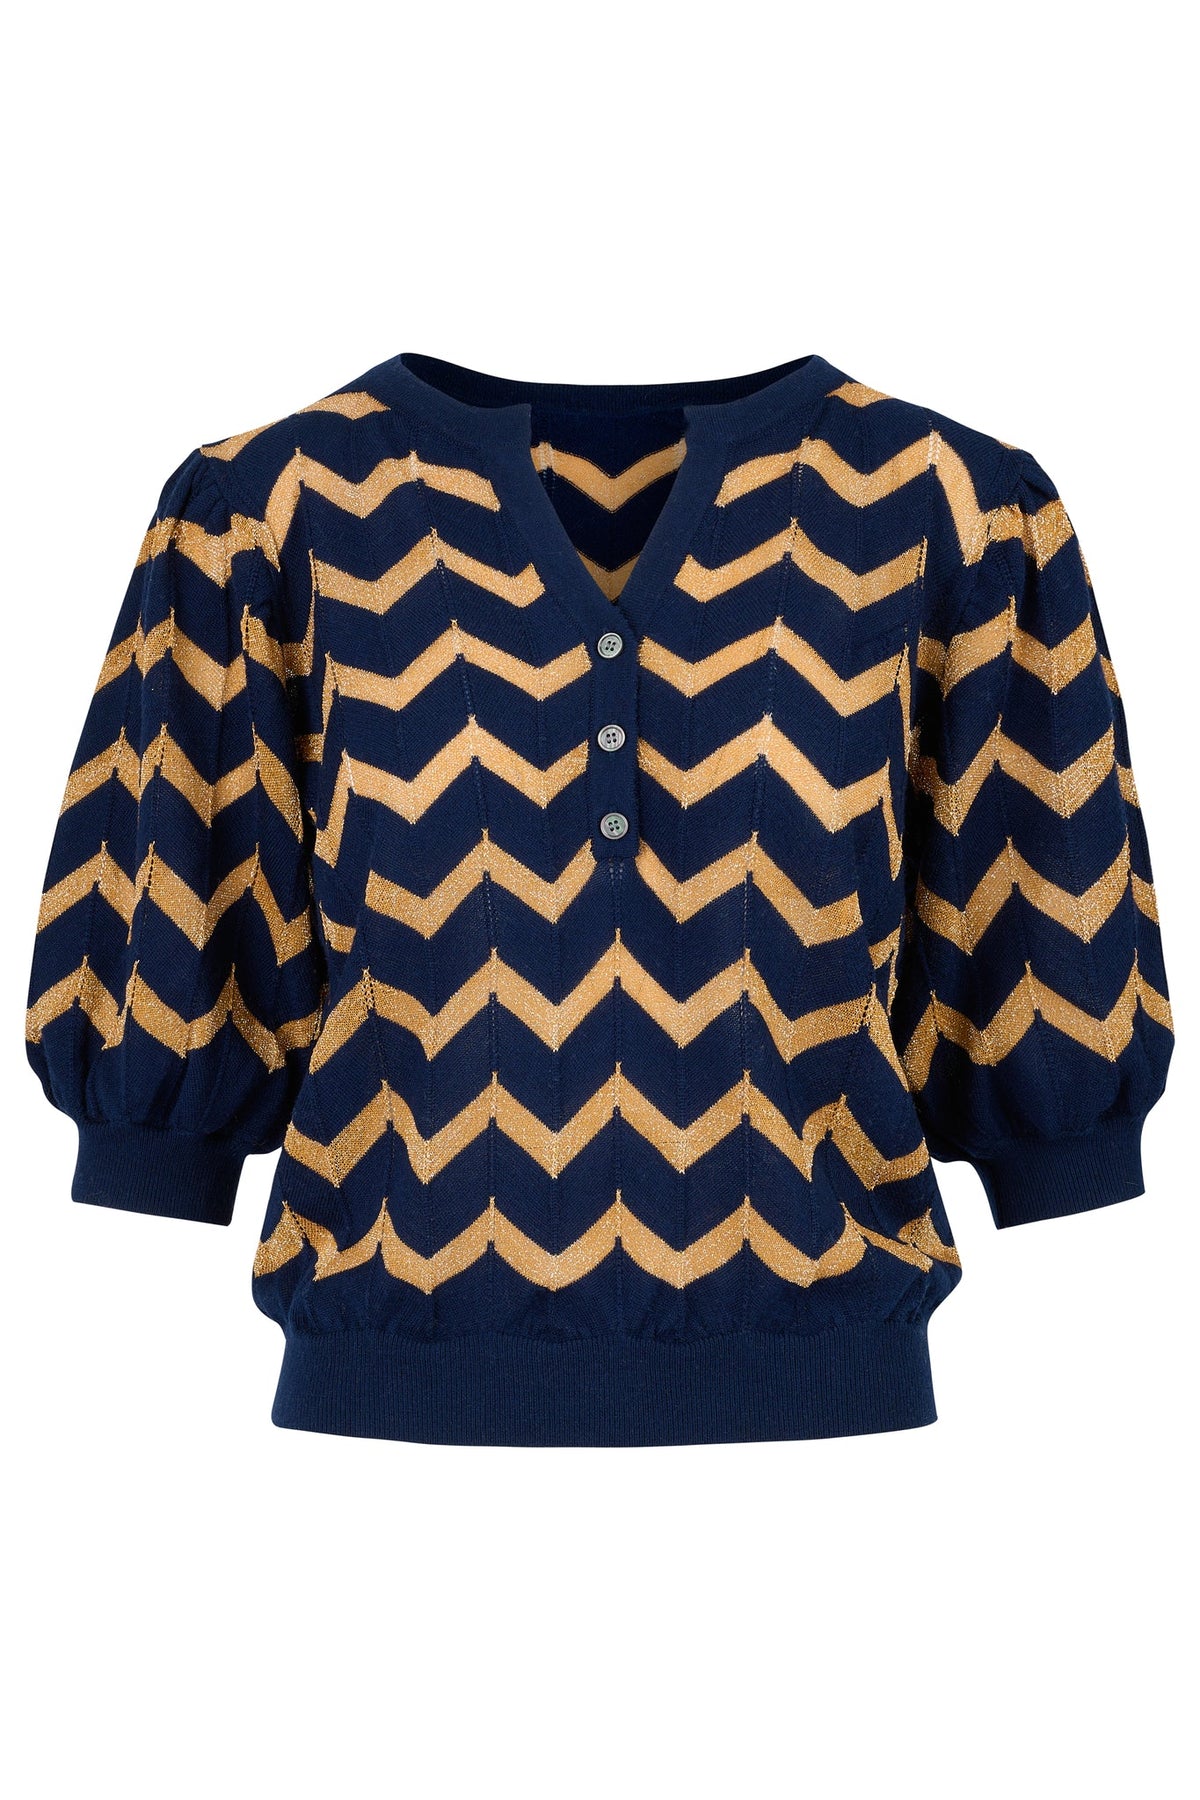 Navy blue and gold short sleeved chevron top with a notch neck and 3 button fastening